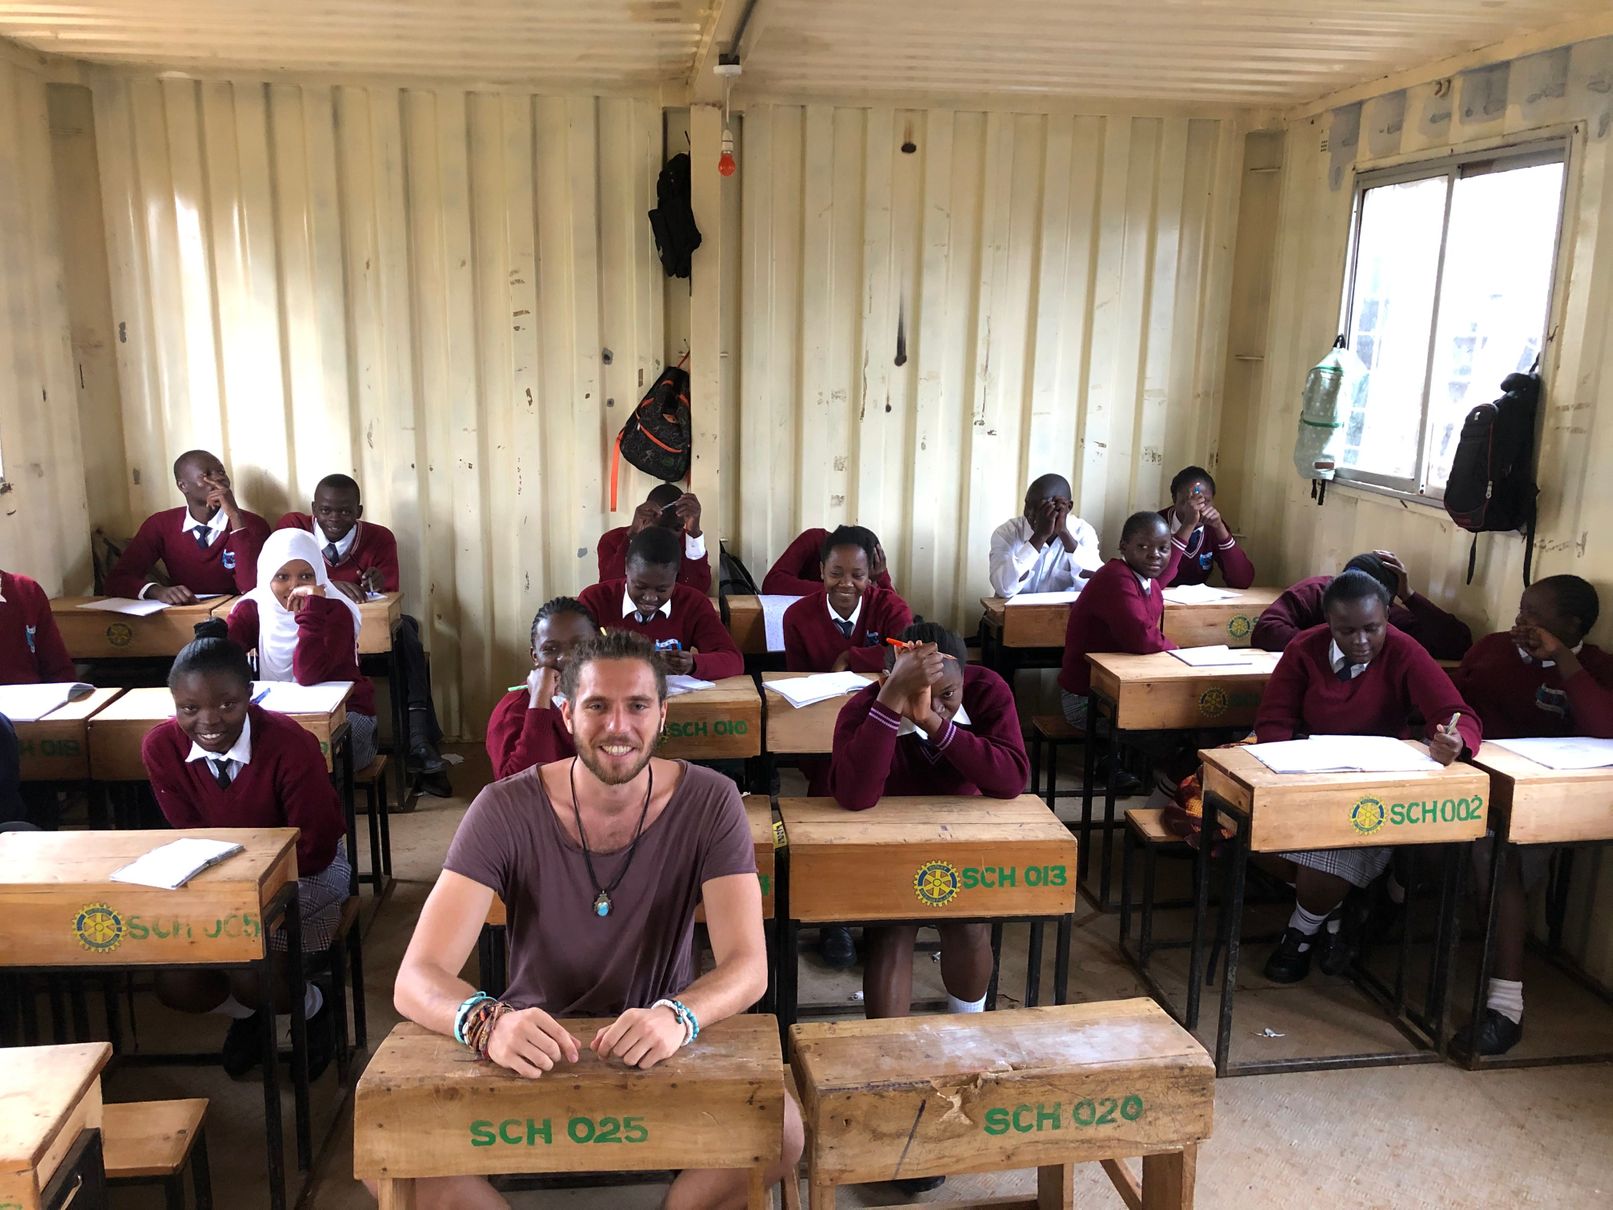 me inside a class with local students in Kibera